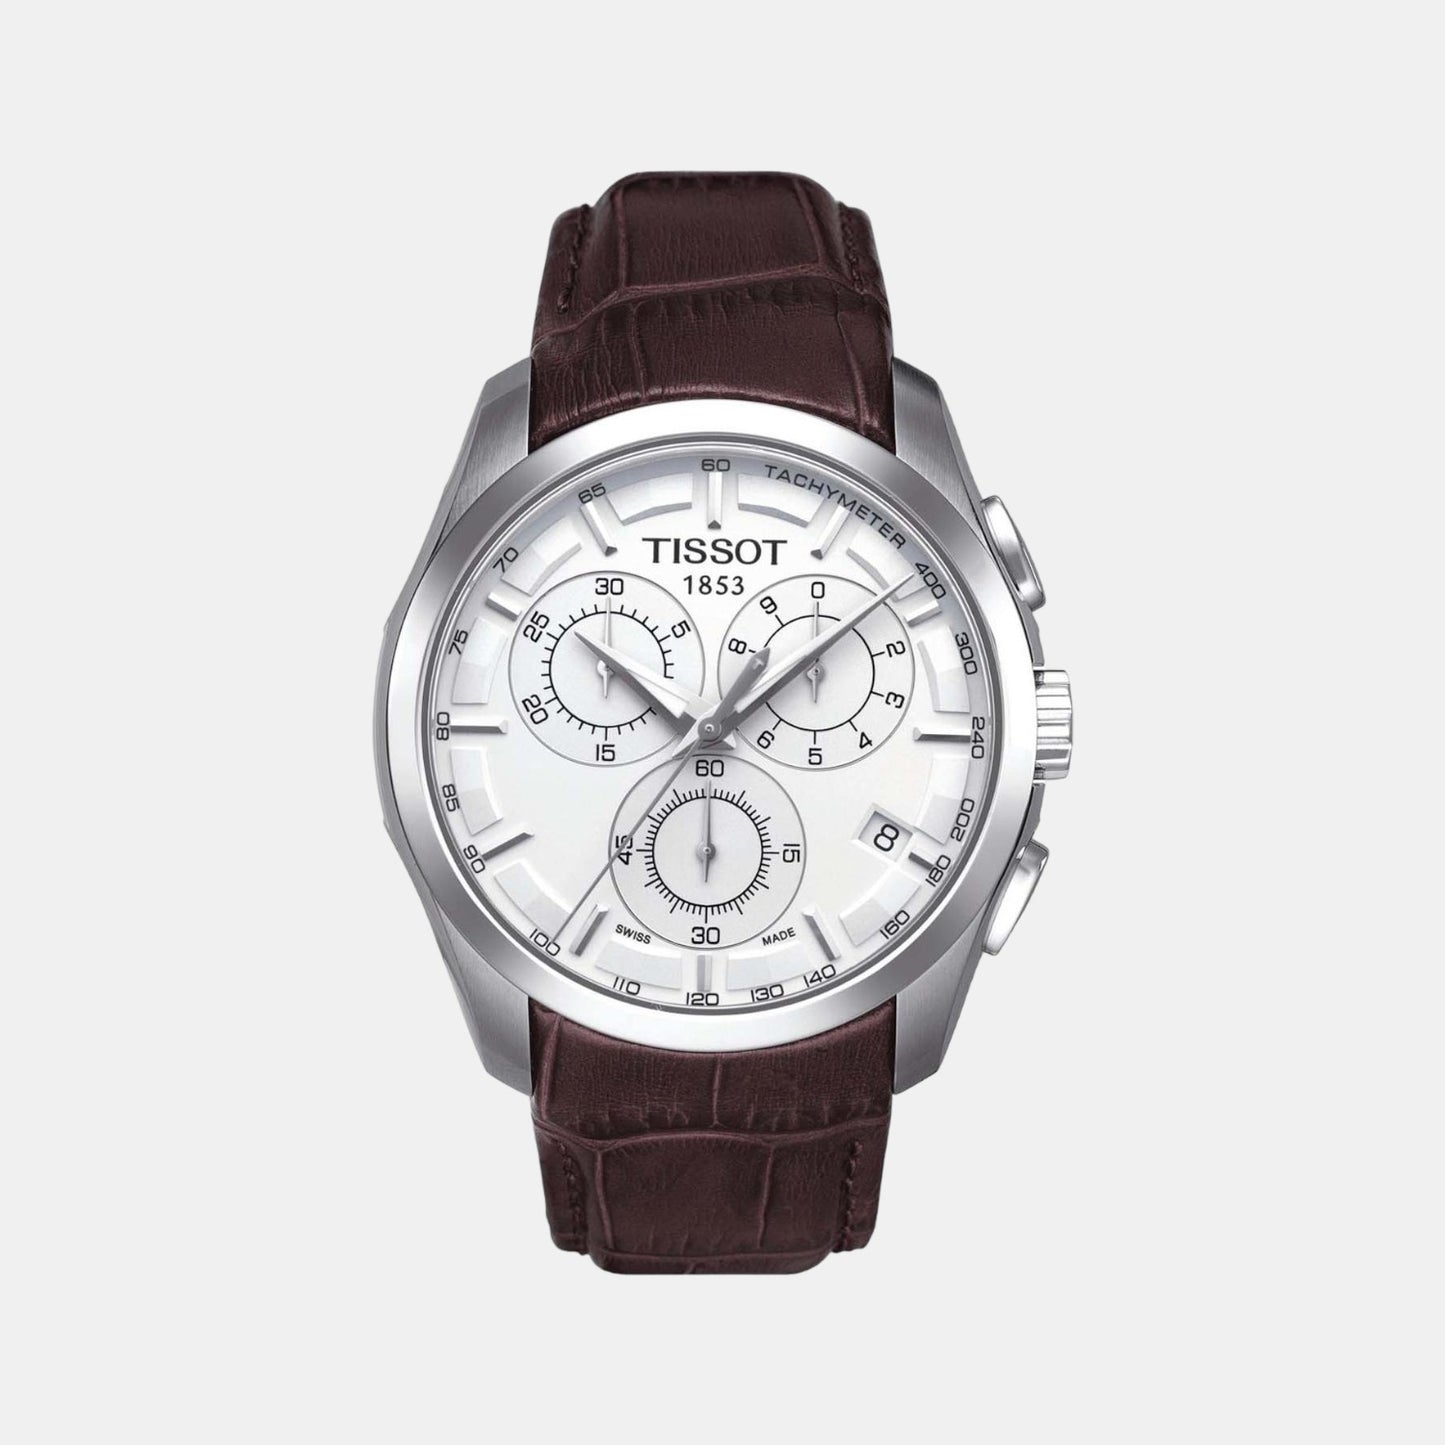 Couturier Male Chronograph Leather Watch T0356171603100